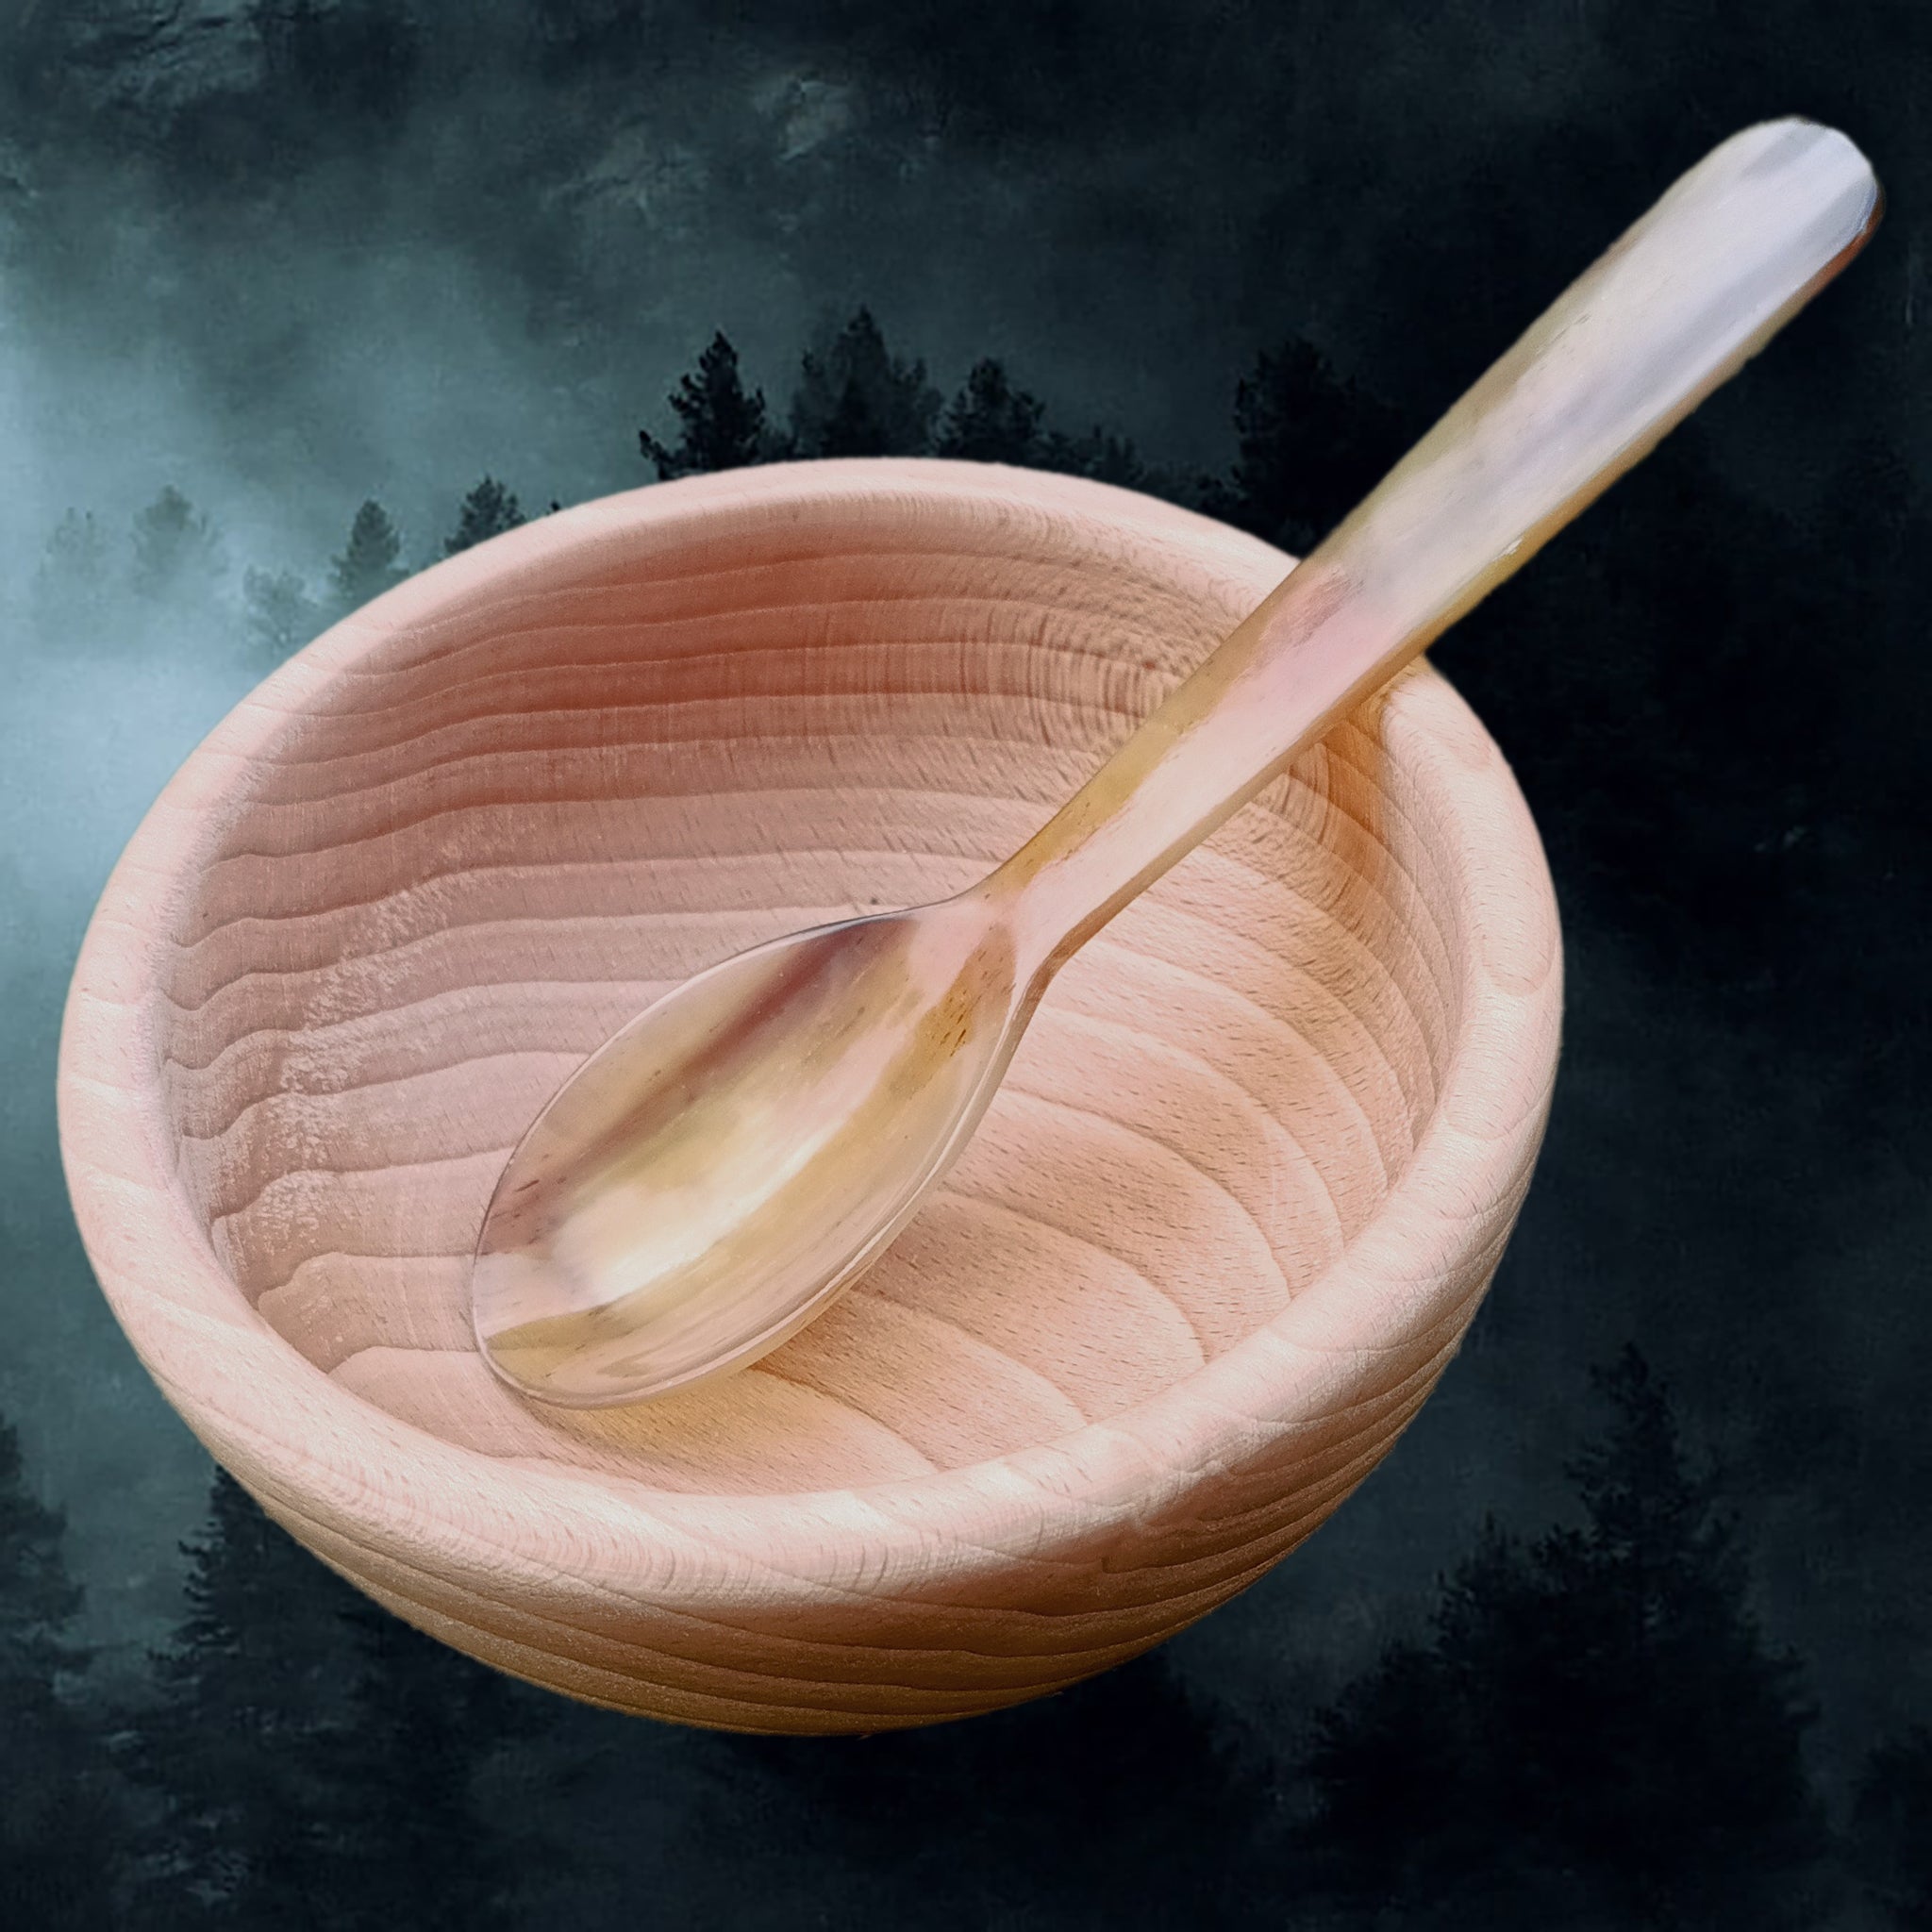 Large horn spoon for Viking / Medieval feasting in Medium Hand-Turned Wooden Bowl